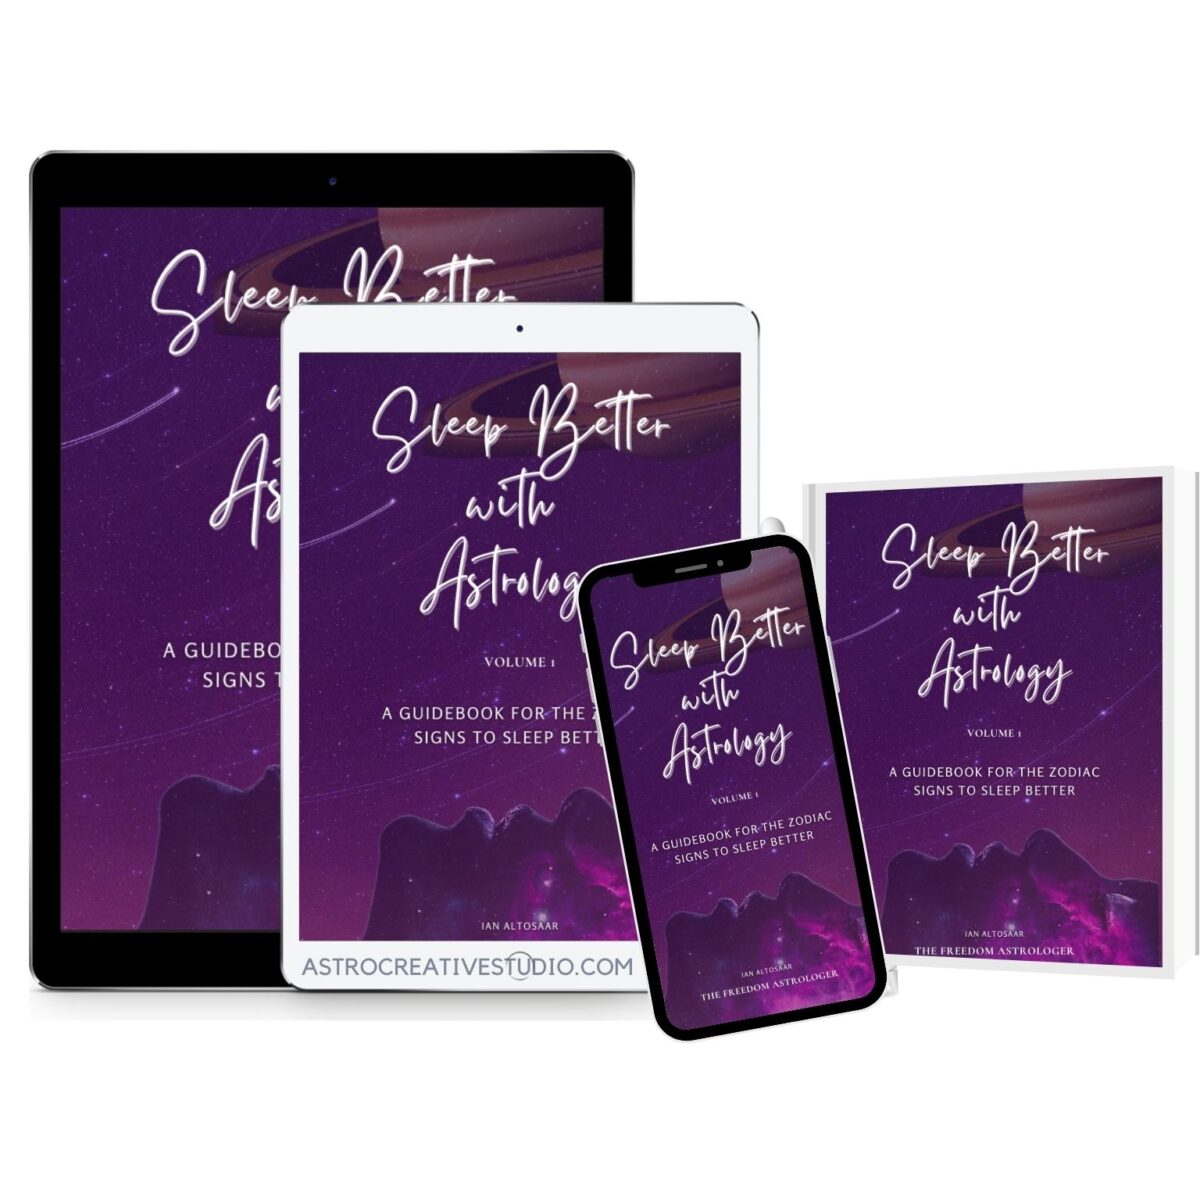 Digital Book for The Freedom Astrologer